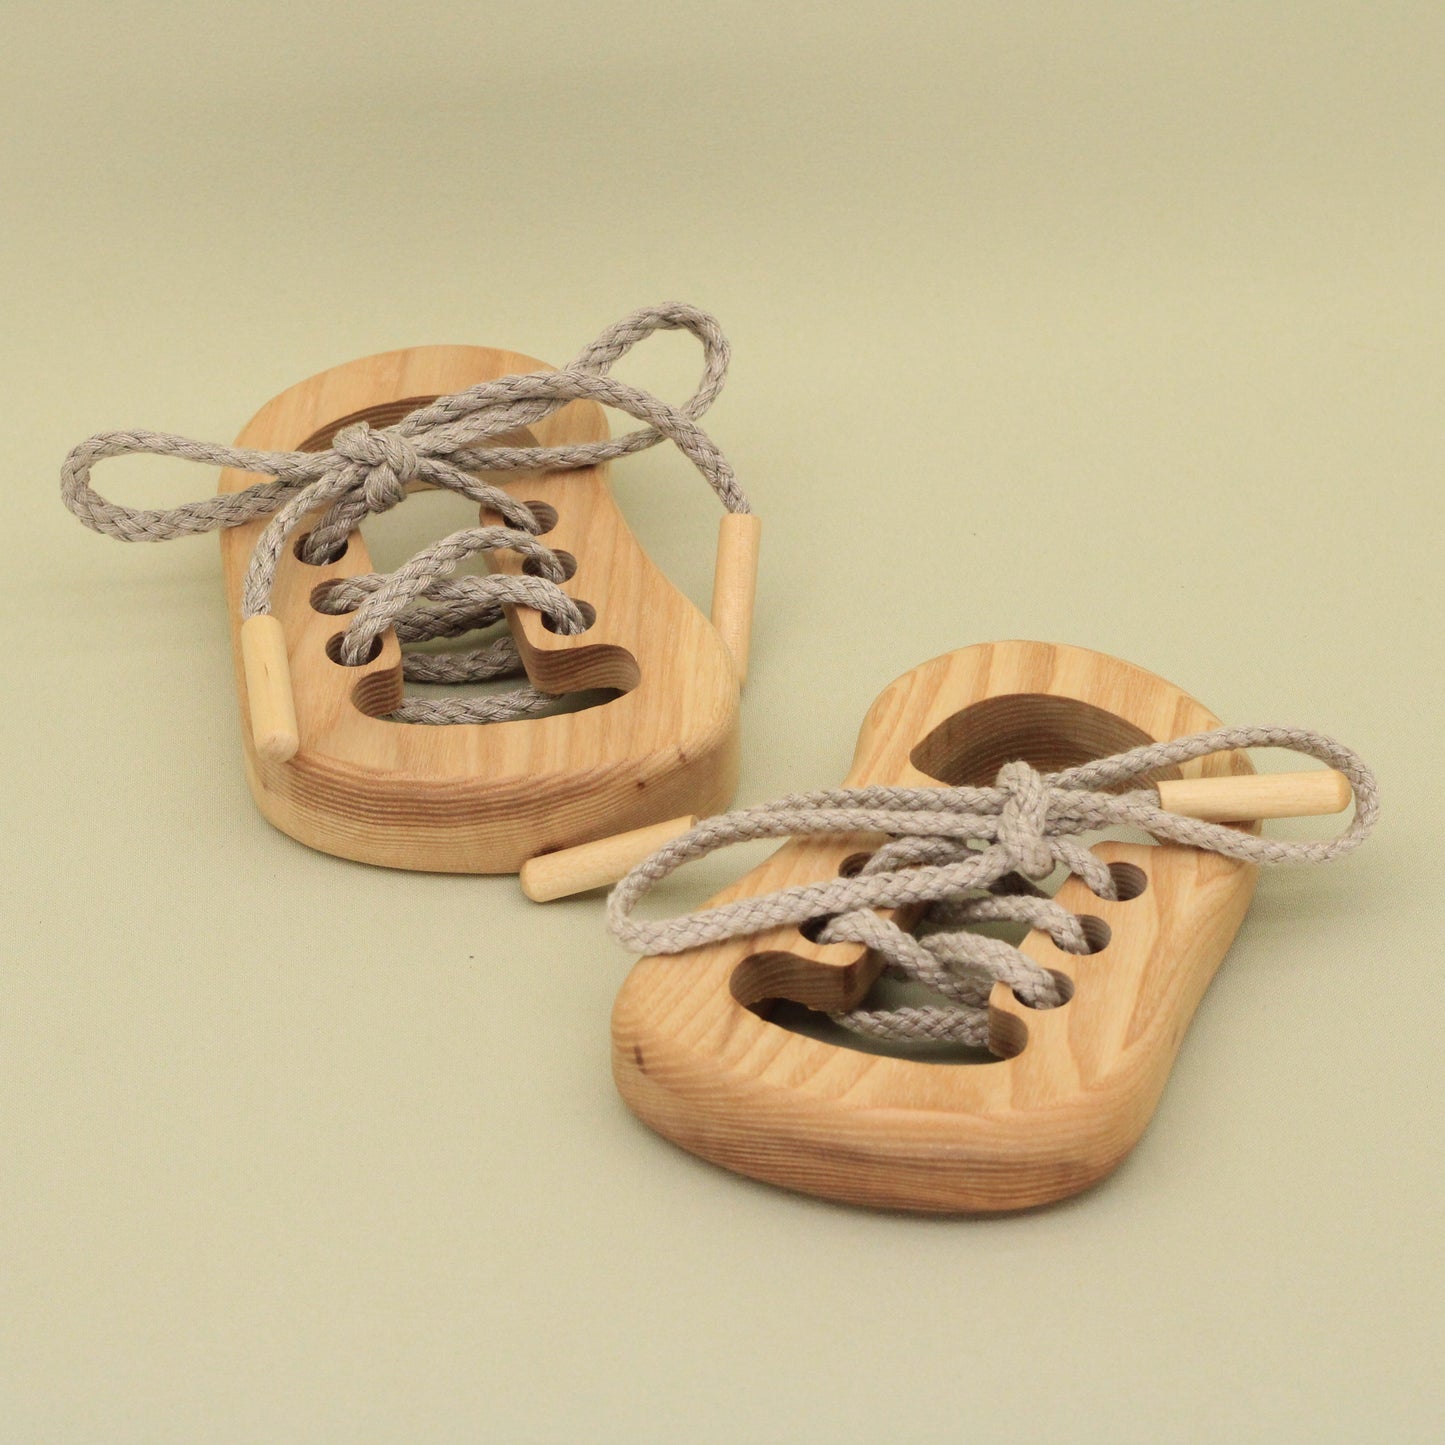 Lotes Toys Natural Wooden Threading Lacing Shoe pair TT19 L,R